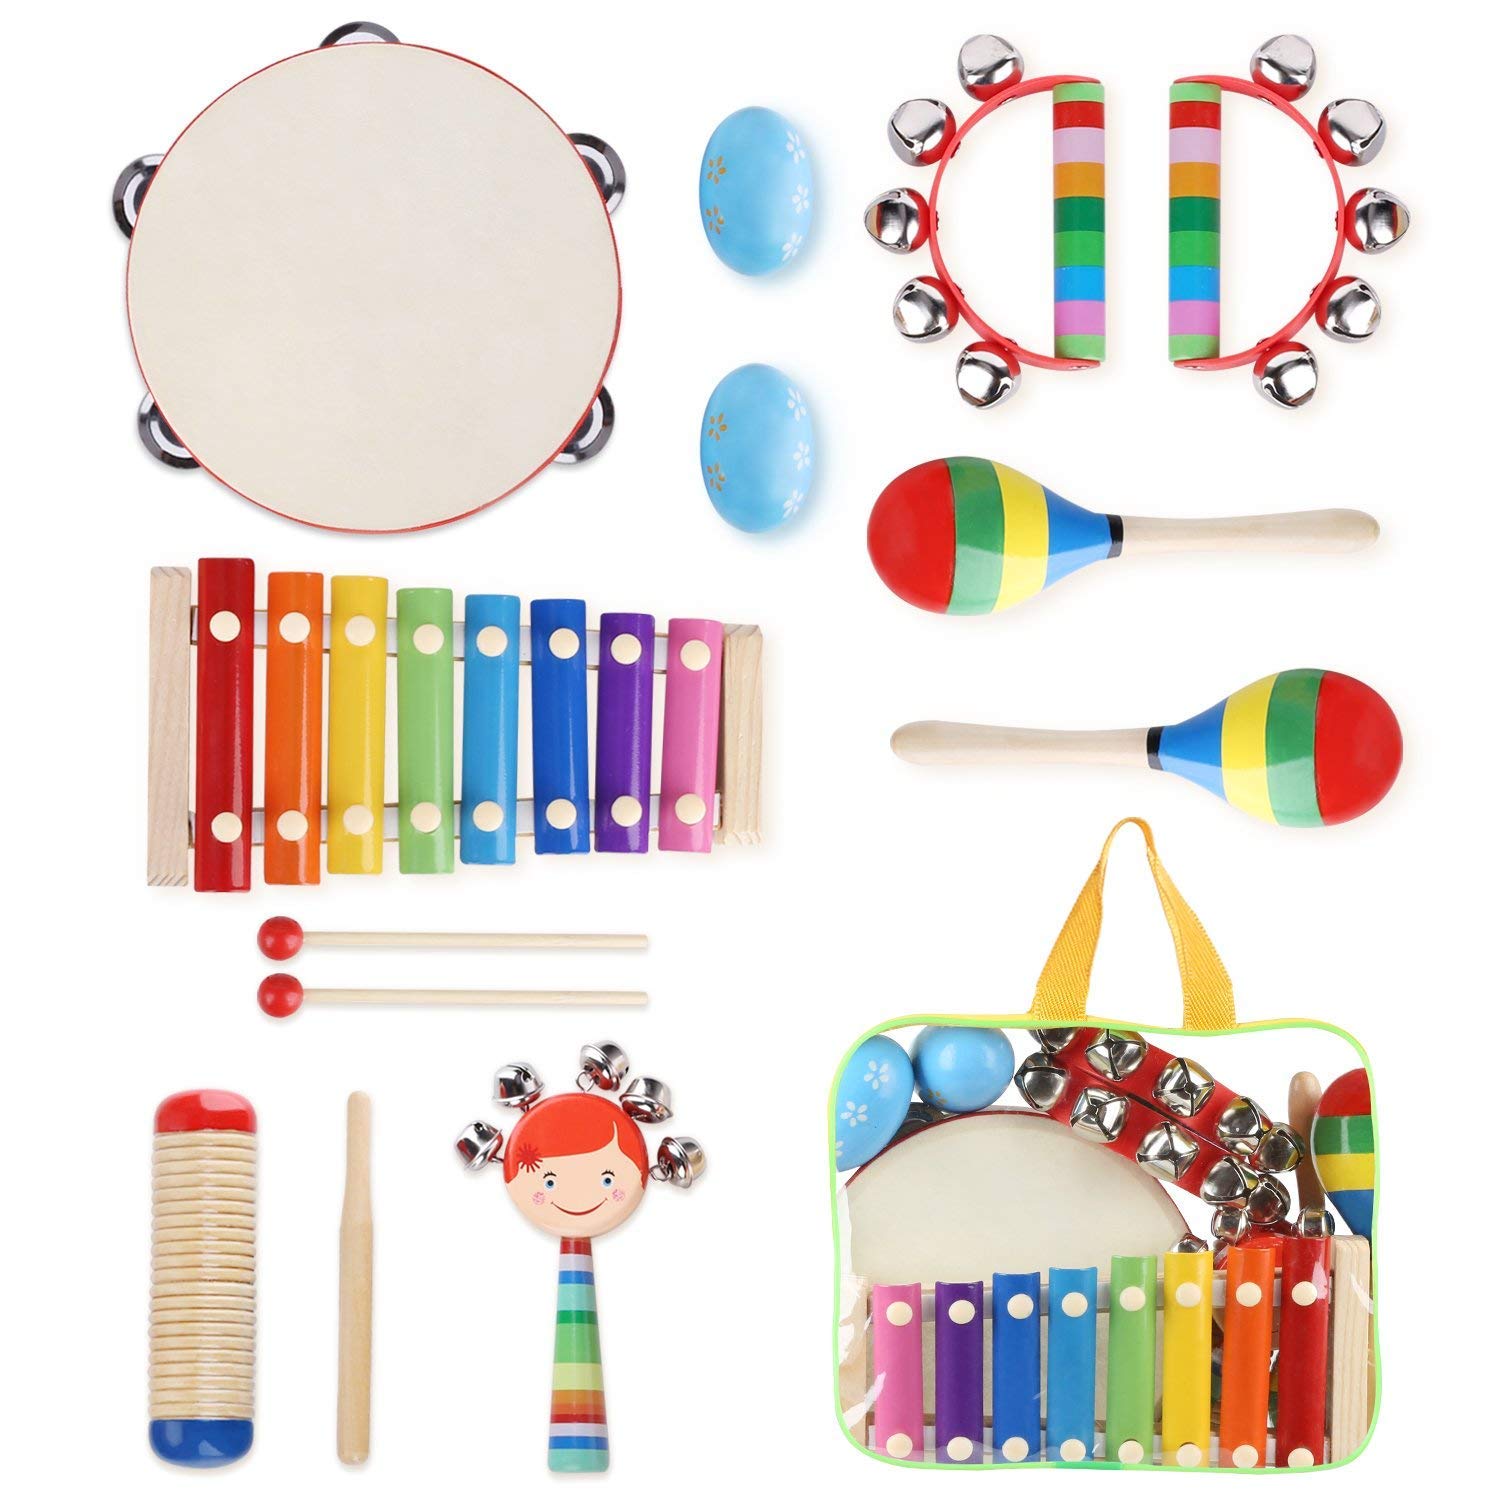 Xylophone clipart music instrument. Yissvic kids musical instruments